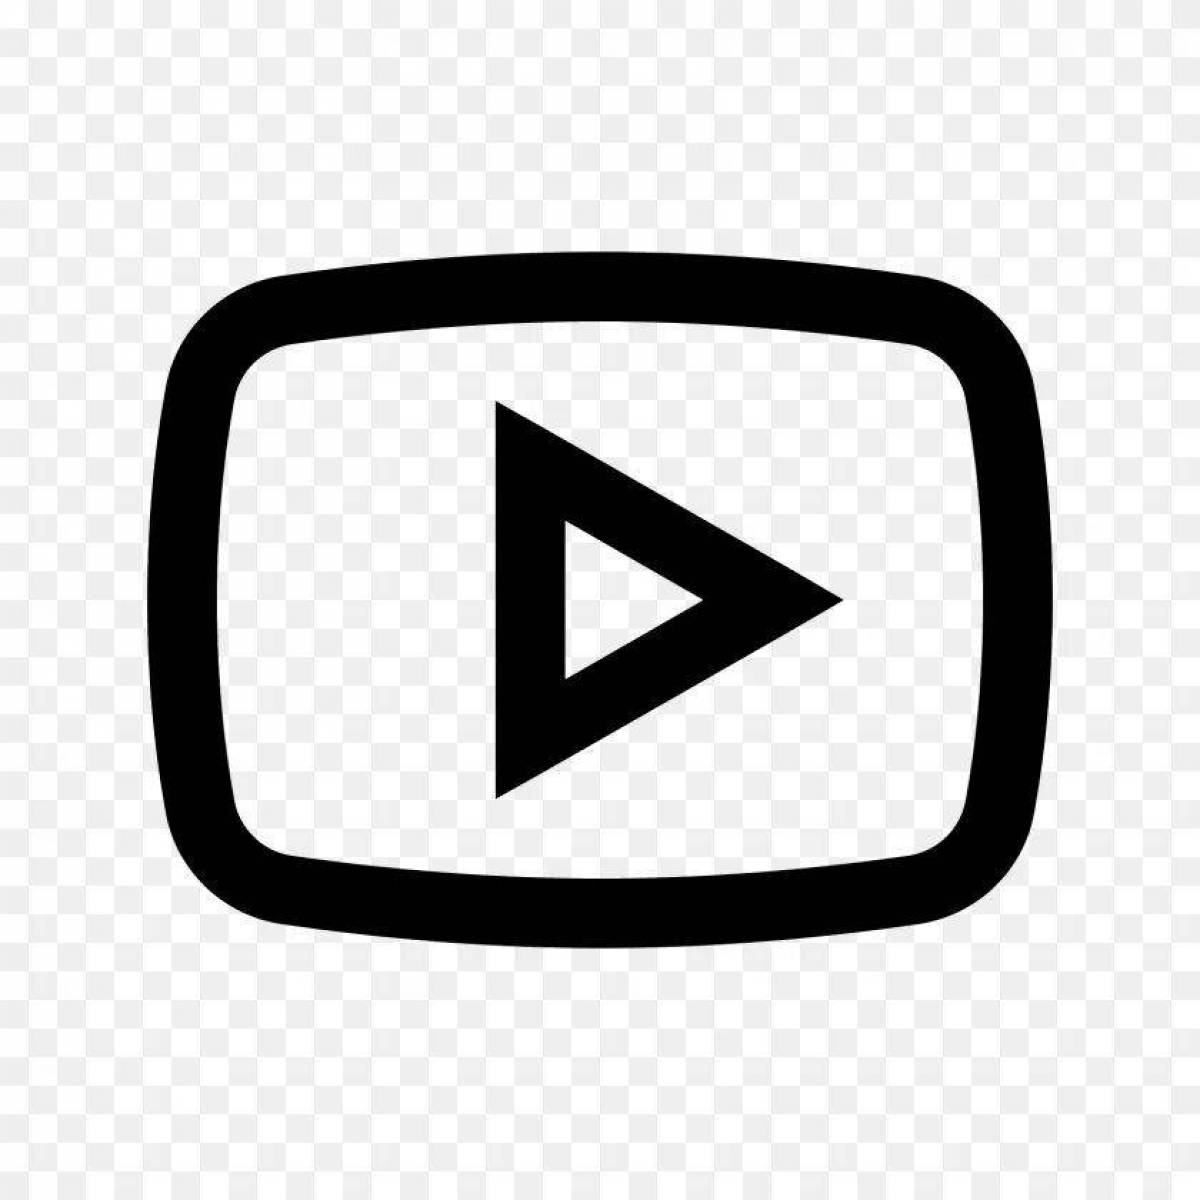 Youtube glowing button coloring page